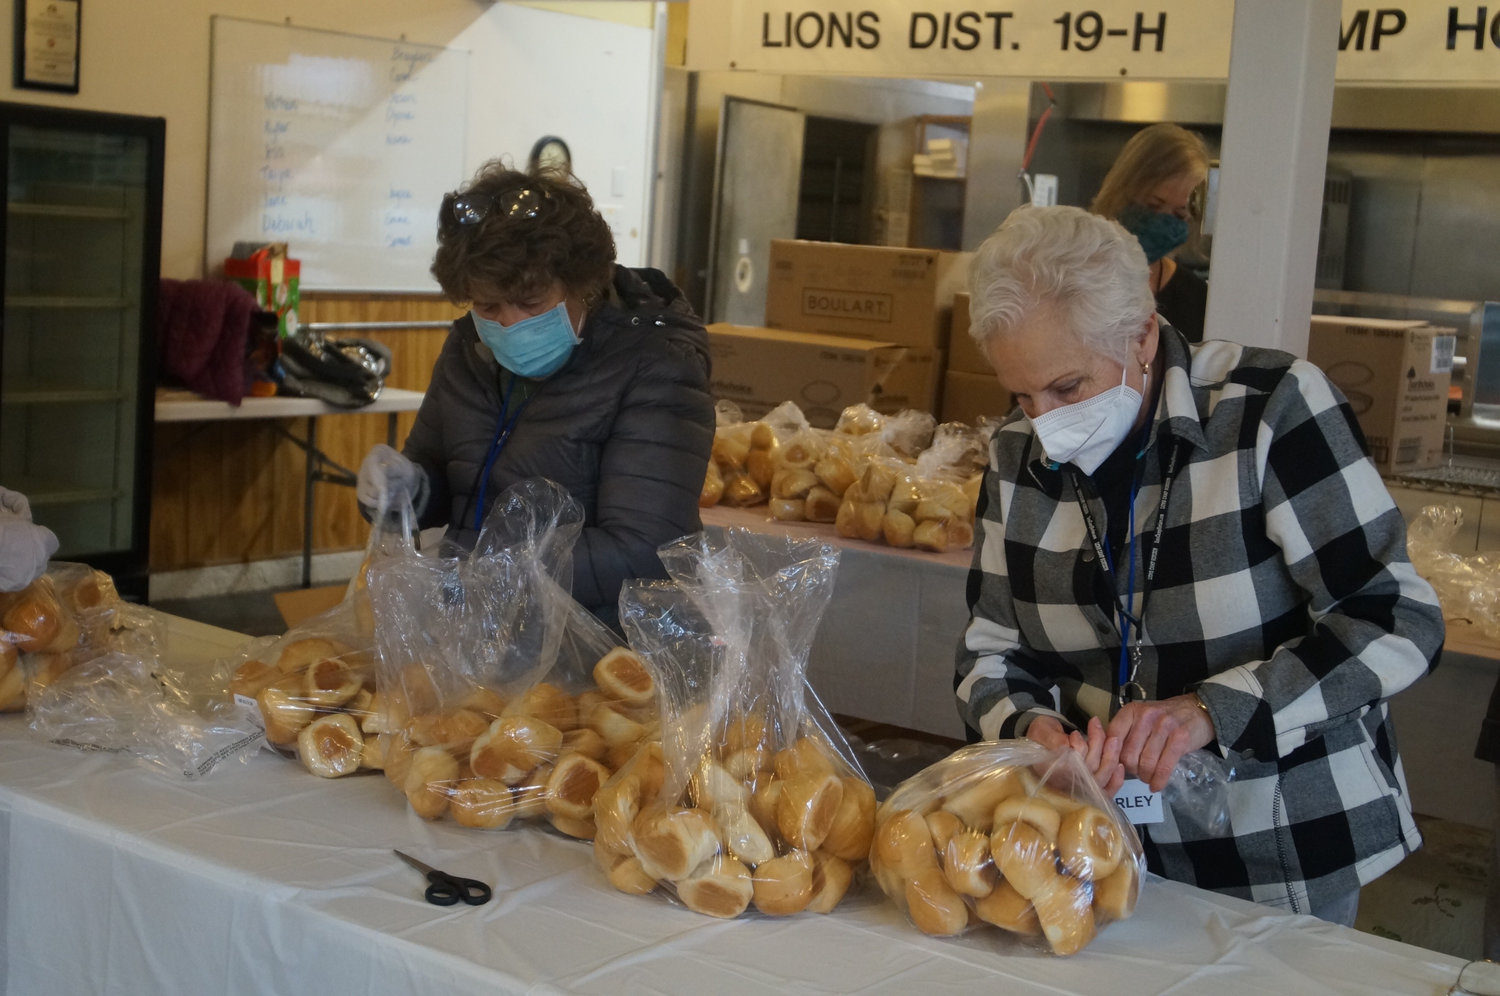 Community Assistance Program (CAP) volunteers finish up the last things they need to do before distributing the family Thanksgiving meal baskets on November 23, 2021. Baskets include turkey, cranberry sauce and rolls among other tasty ingredients.